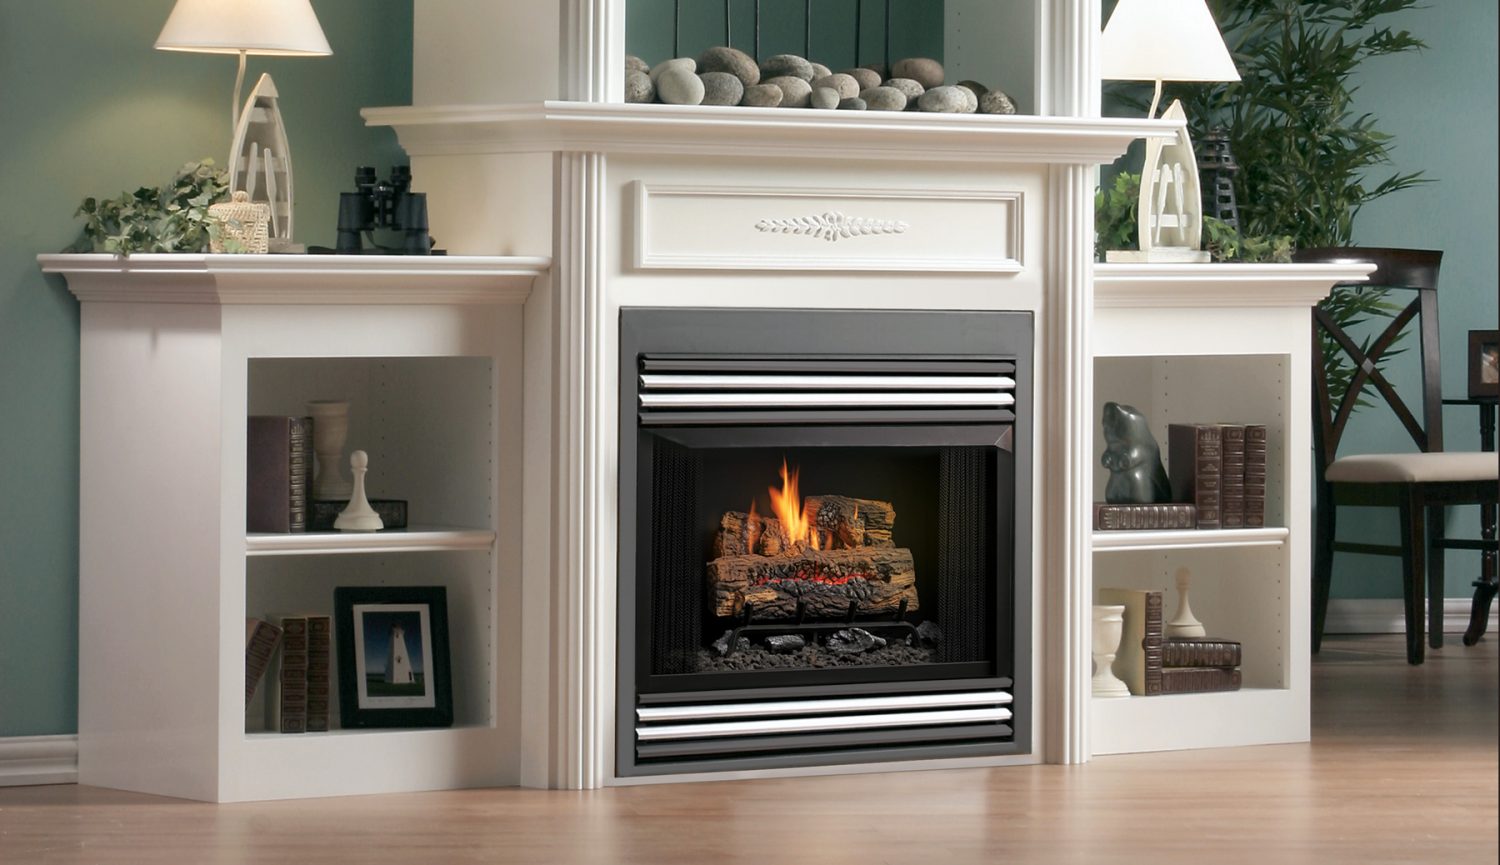 Authorized Kingsman Gas Fireplaces Dealer in Toronto & the GTA ...